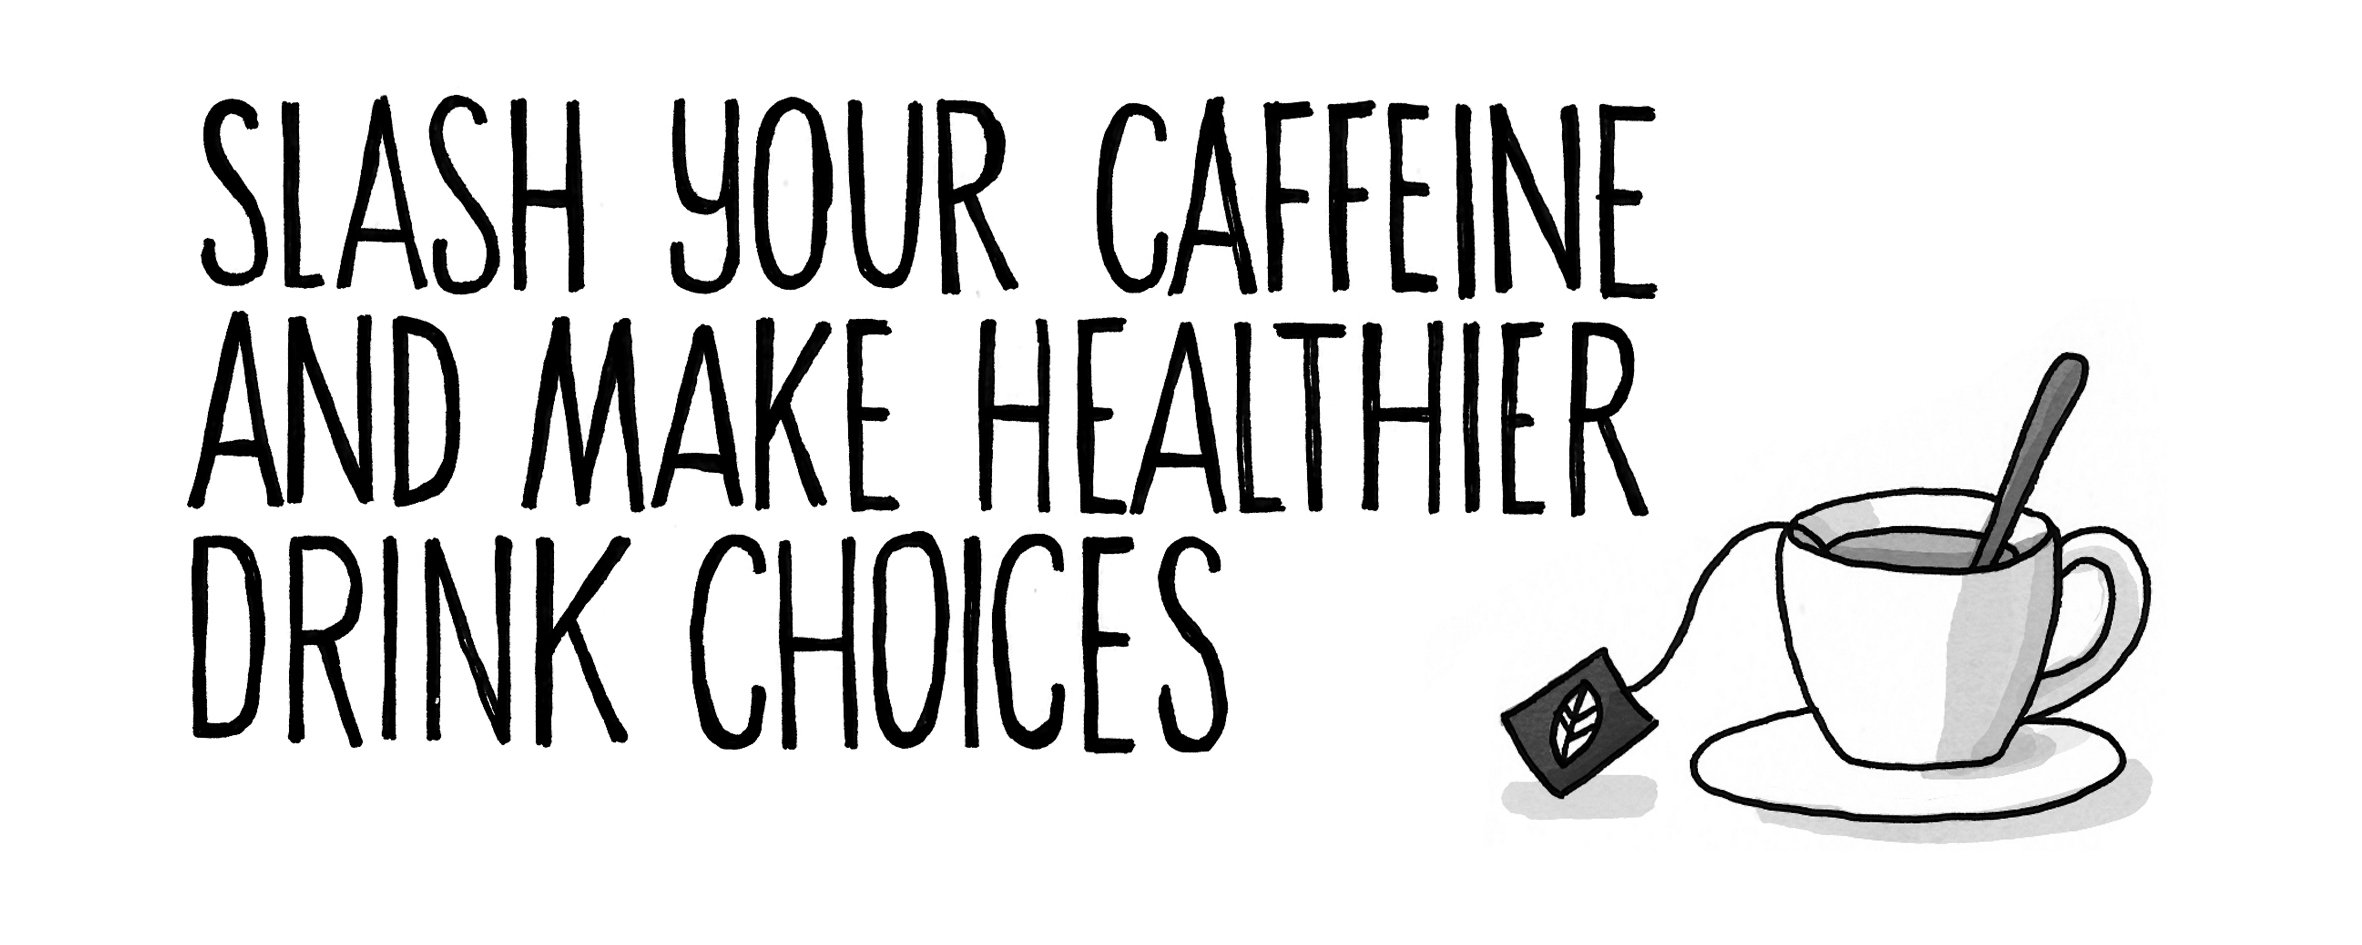 claire-turnbull-planner-illustration-slash-caffeine-make-healthier-choices-by-creative-people